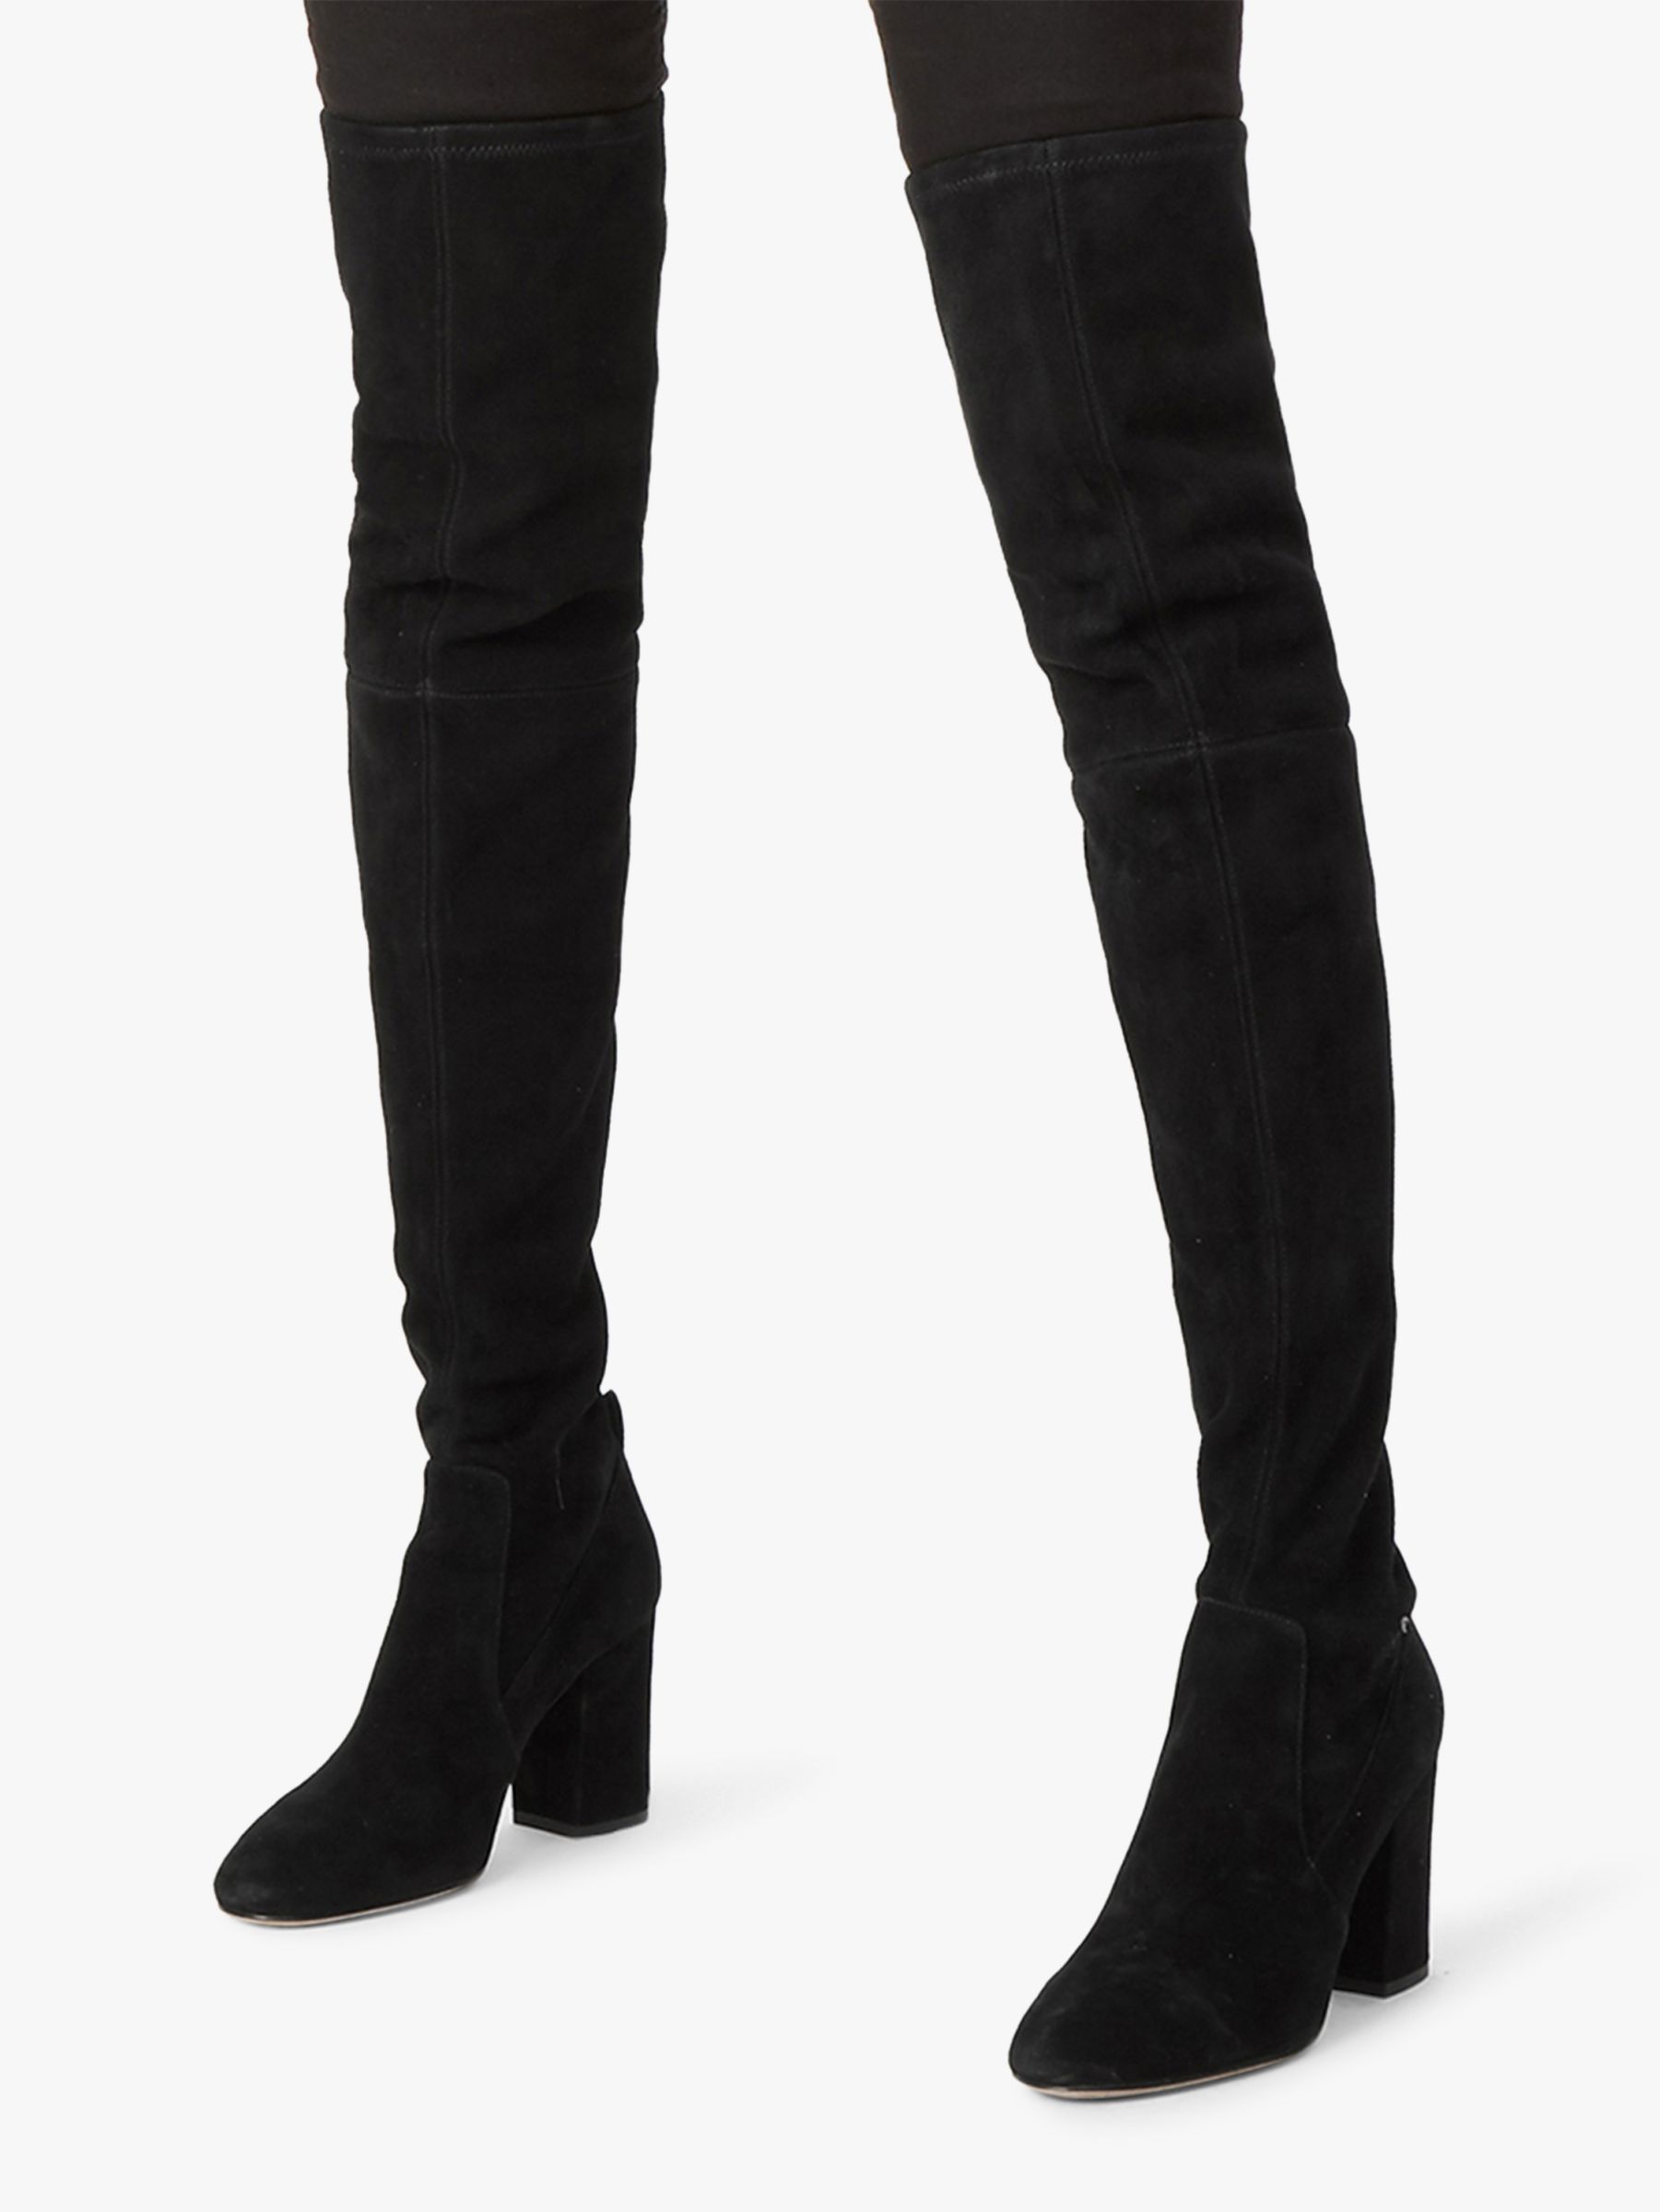 Coach Giselle Over The Knee Block Heel Boots, Black Suede